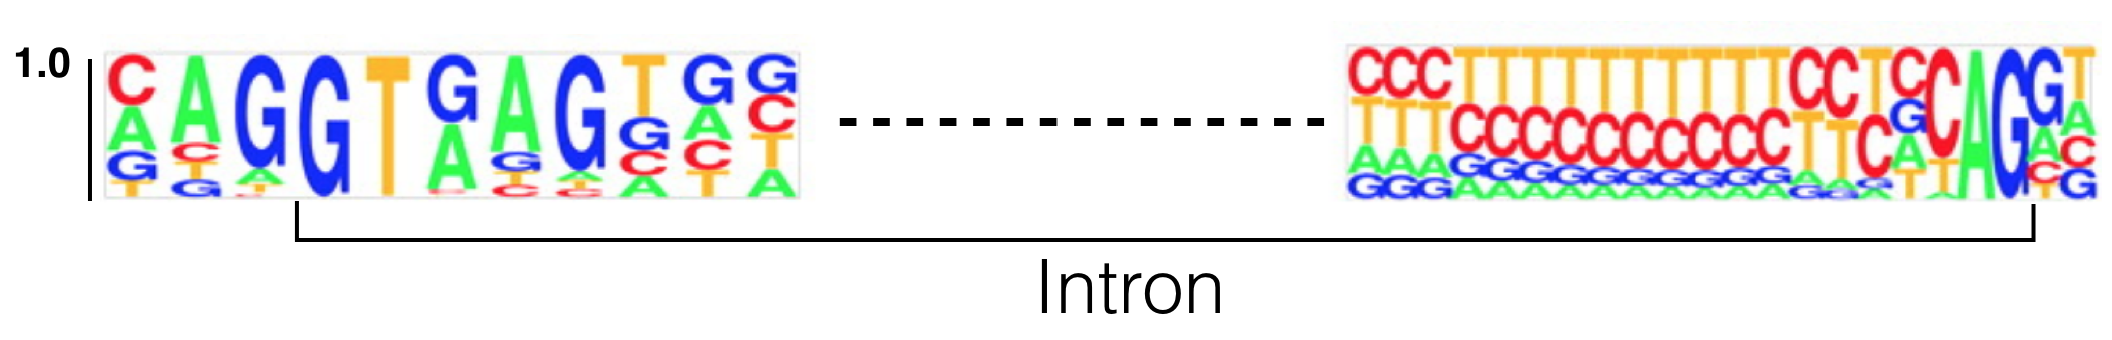 This sequence logo was created by aligning 5' and 3' splice site junctions of *all* human introns below a certain size. The Y axis represents frequency. The intron is bracketed as shown. Modified from Lim and Burge 2001.